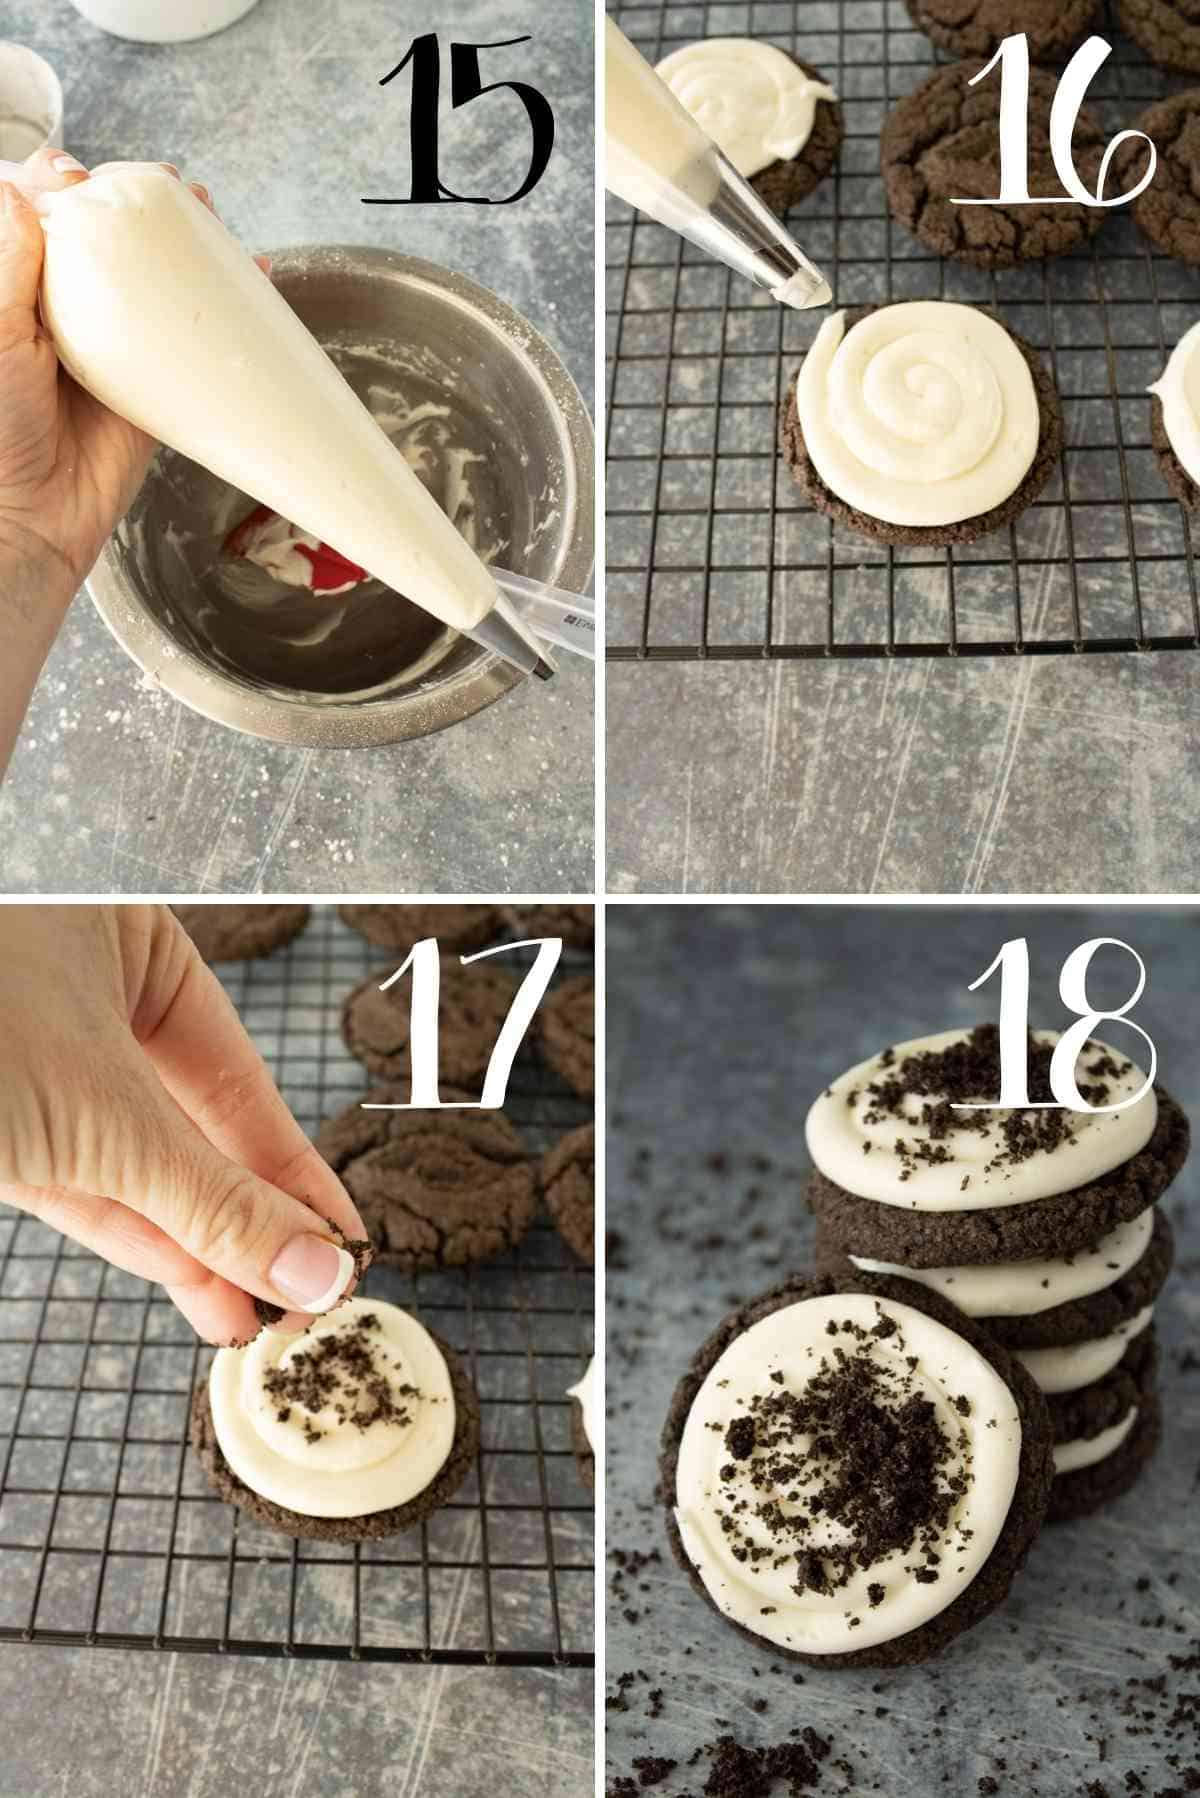 Fill a frosting bag with cream cheese frosting, pipe in a swirl on the cookies and sprinkle with oreo crumbs.